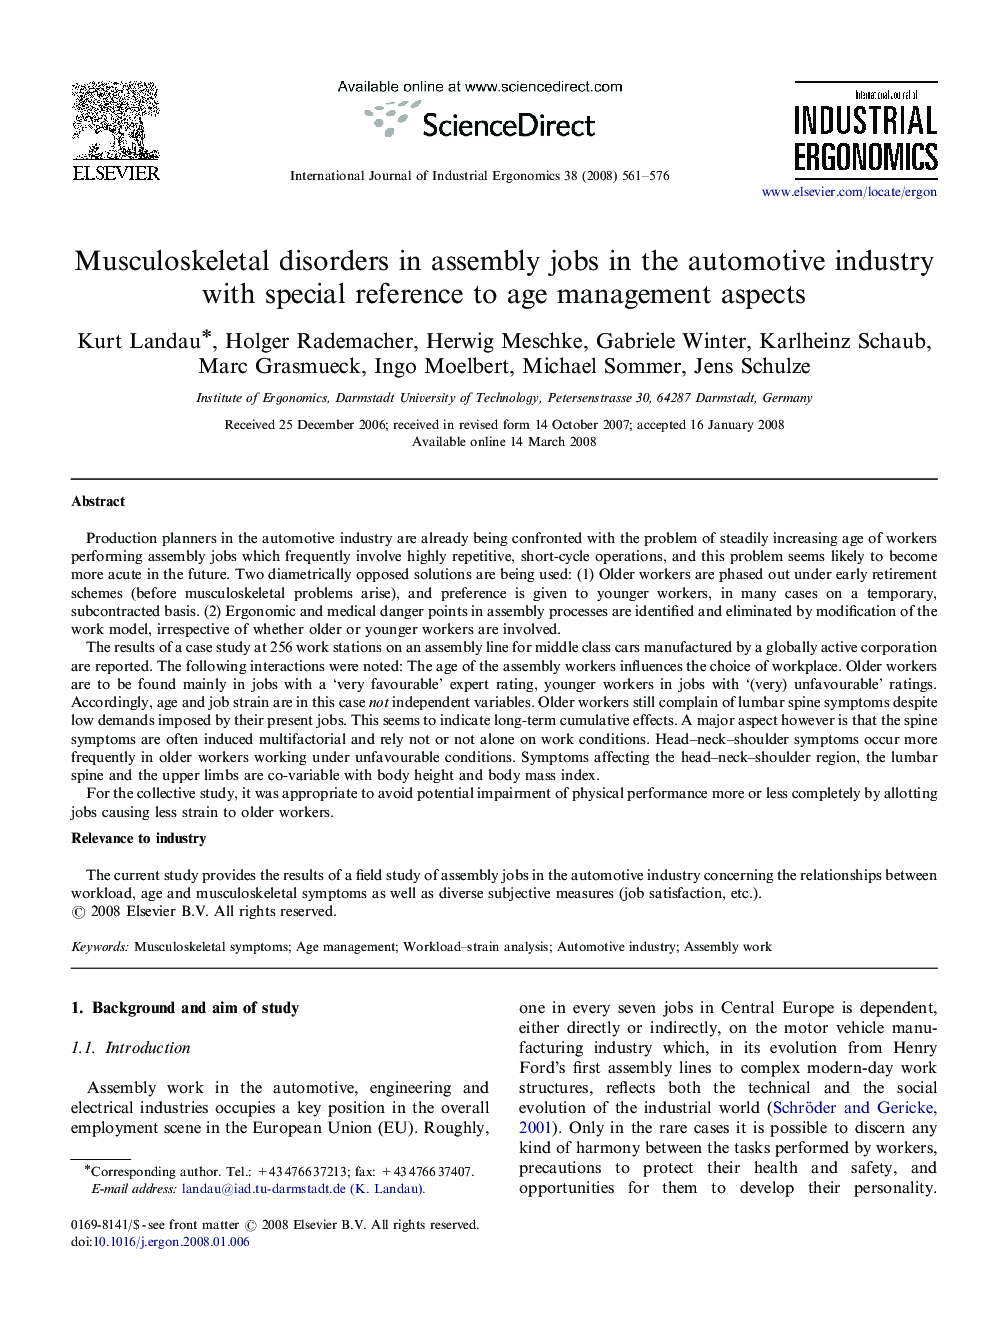 Musculoskeletal disorders in assembly jobs in the automotive industry with special reference to age management aspects